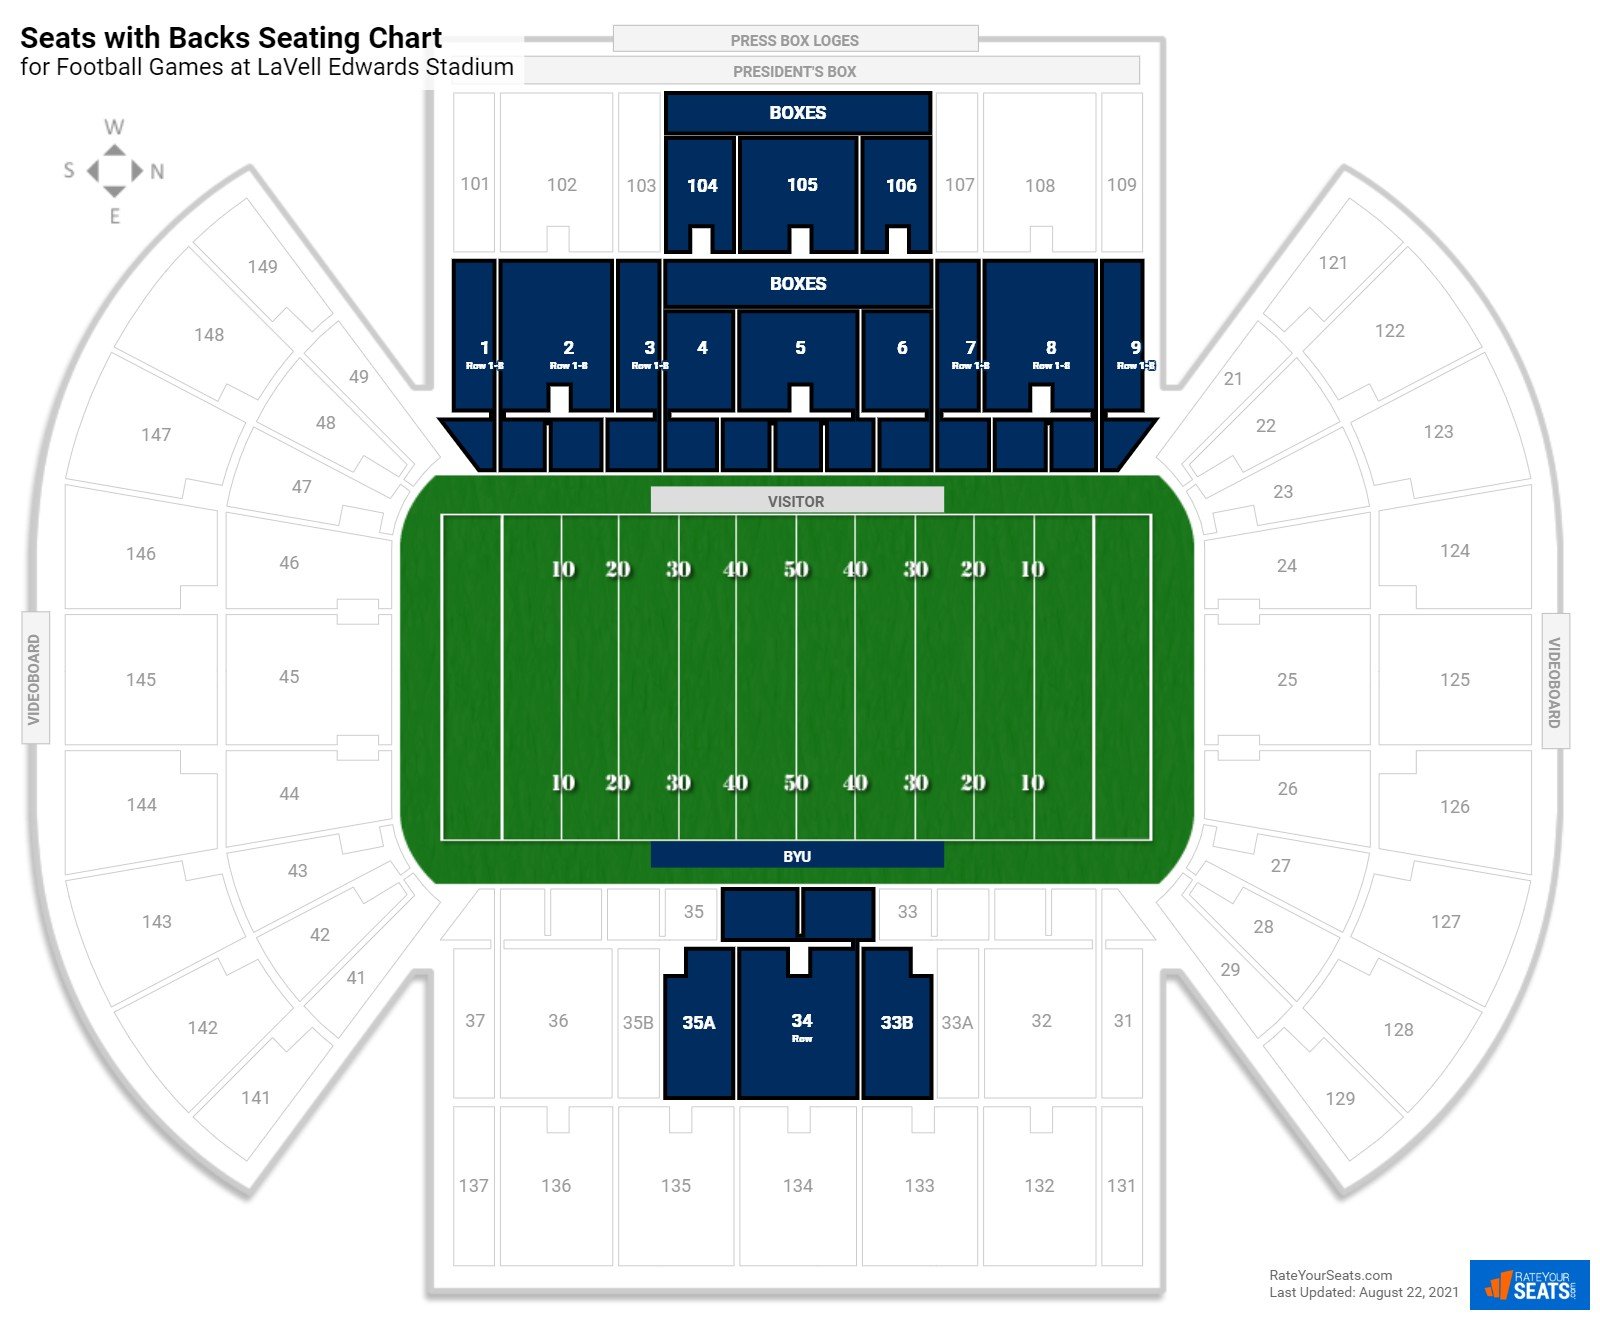 Football Seats with Backs Seating Chart at LaVell Edwards Stadium